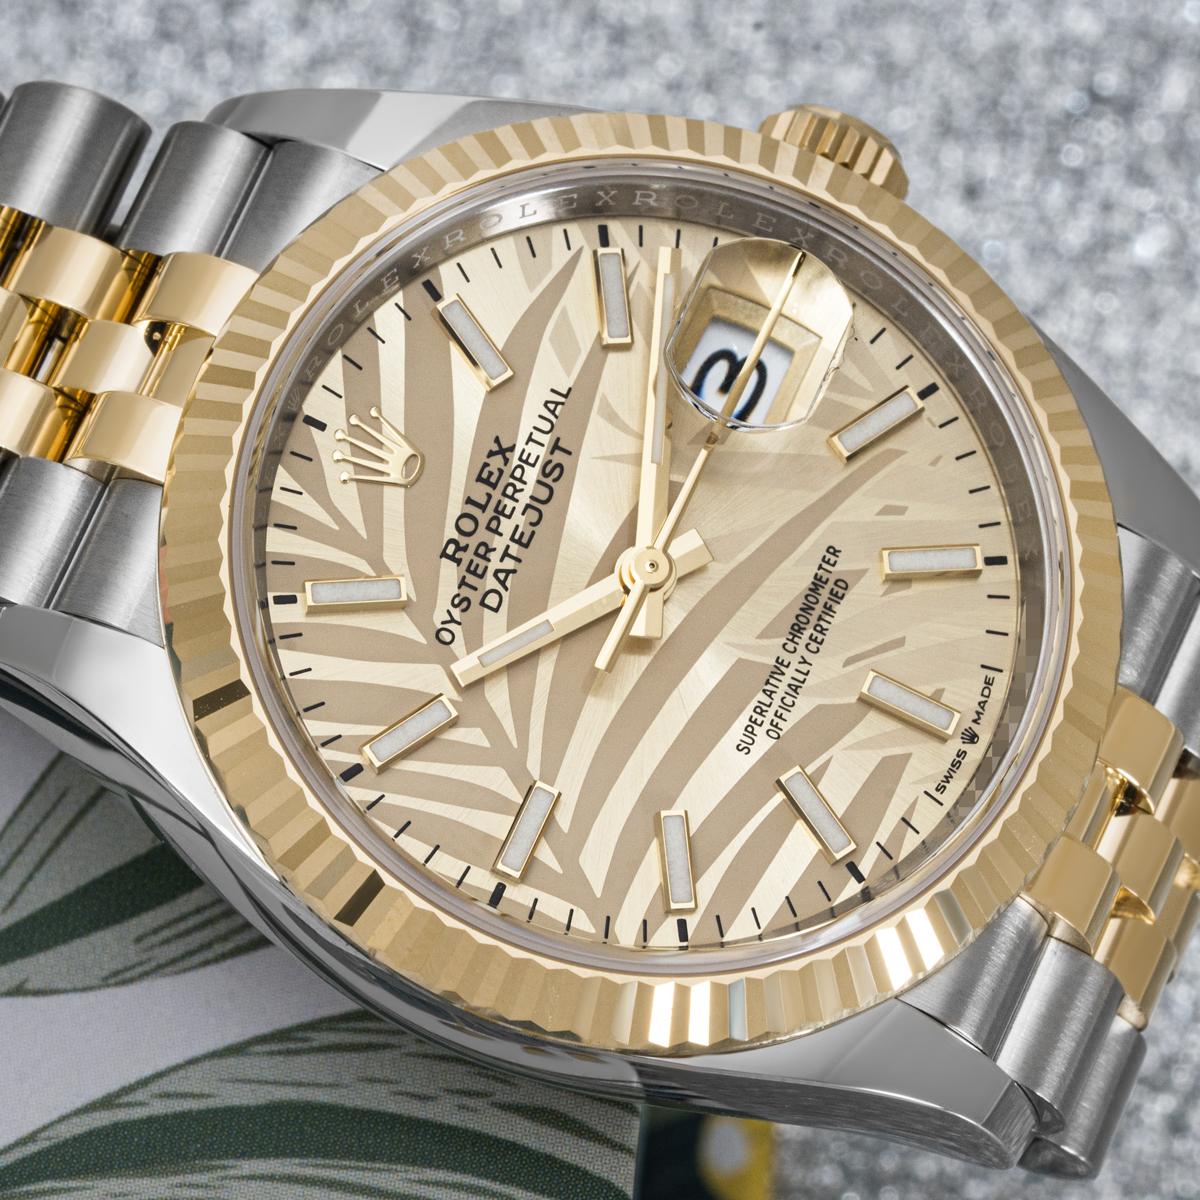 A 36mm stainless steel and yellow gold Datejust by Rolex. Featuring a champagne palm motif dial with applied hour markers. Fitted with a sapphire glass and a self-winding automatic movement. The watch is also equipped with a steel and yellow gold